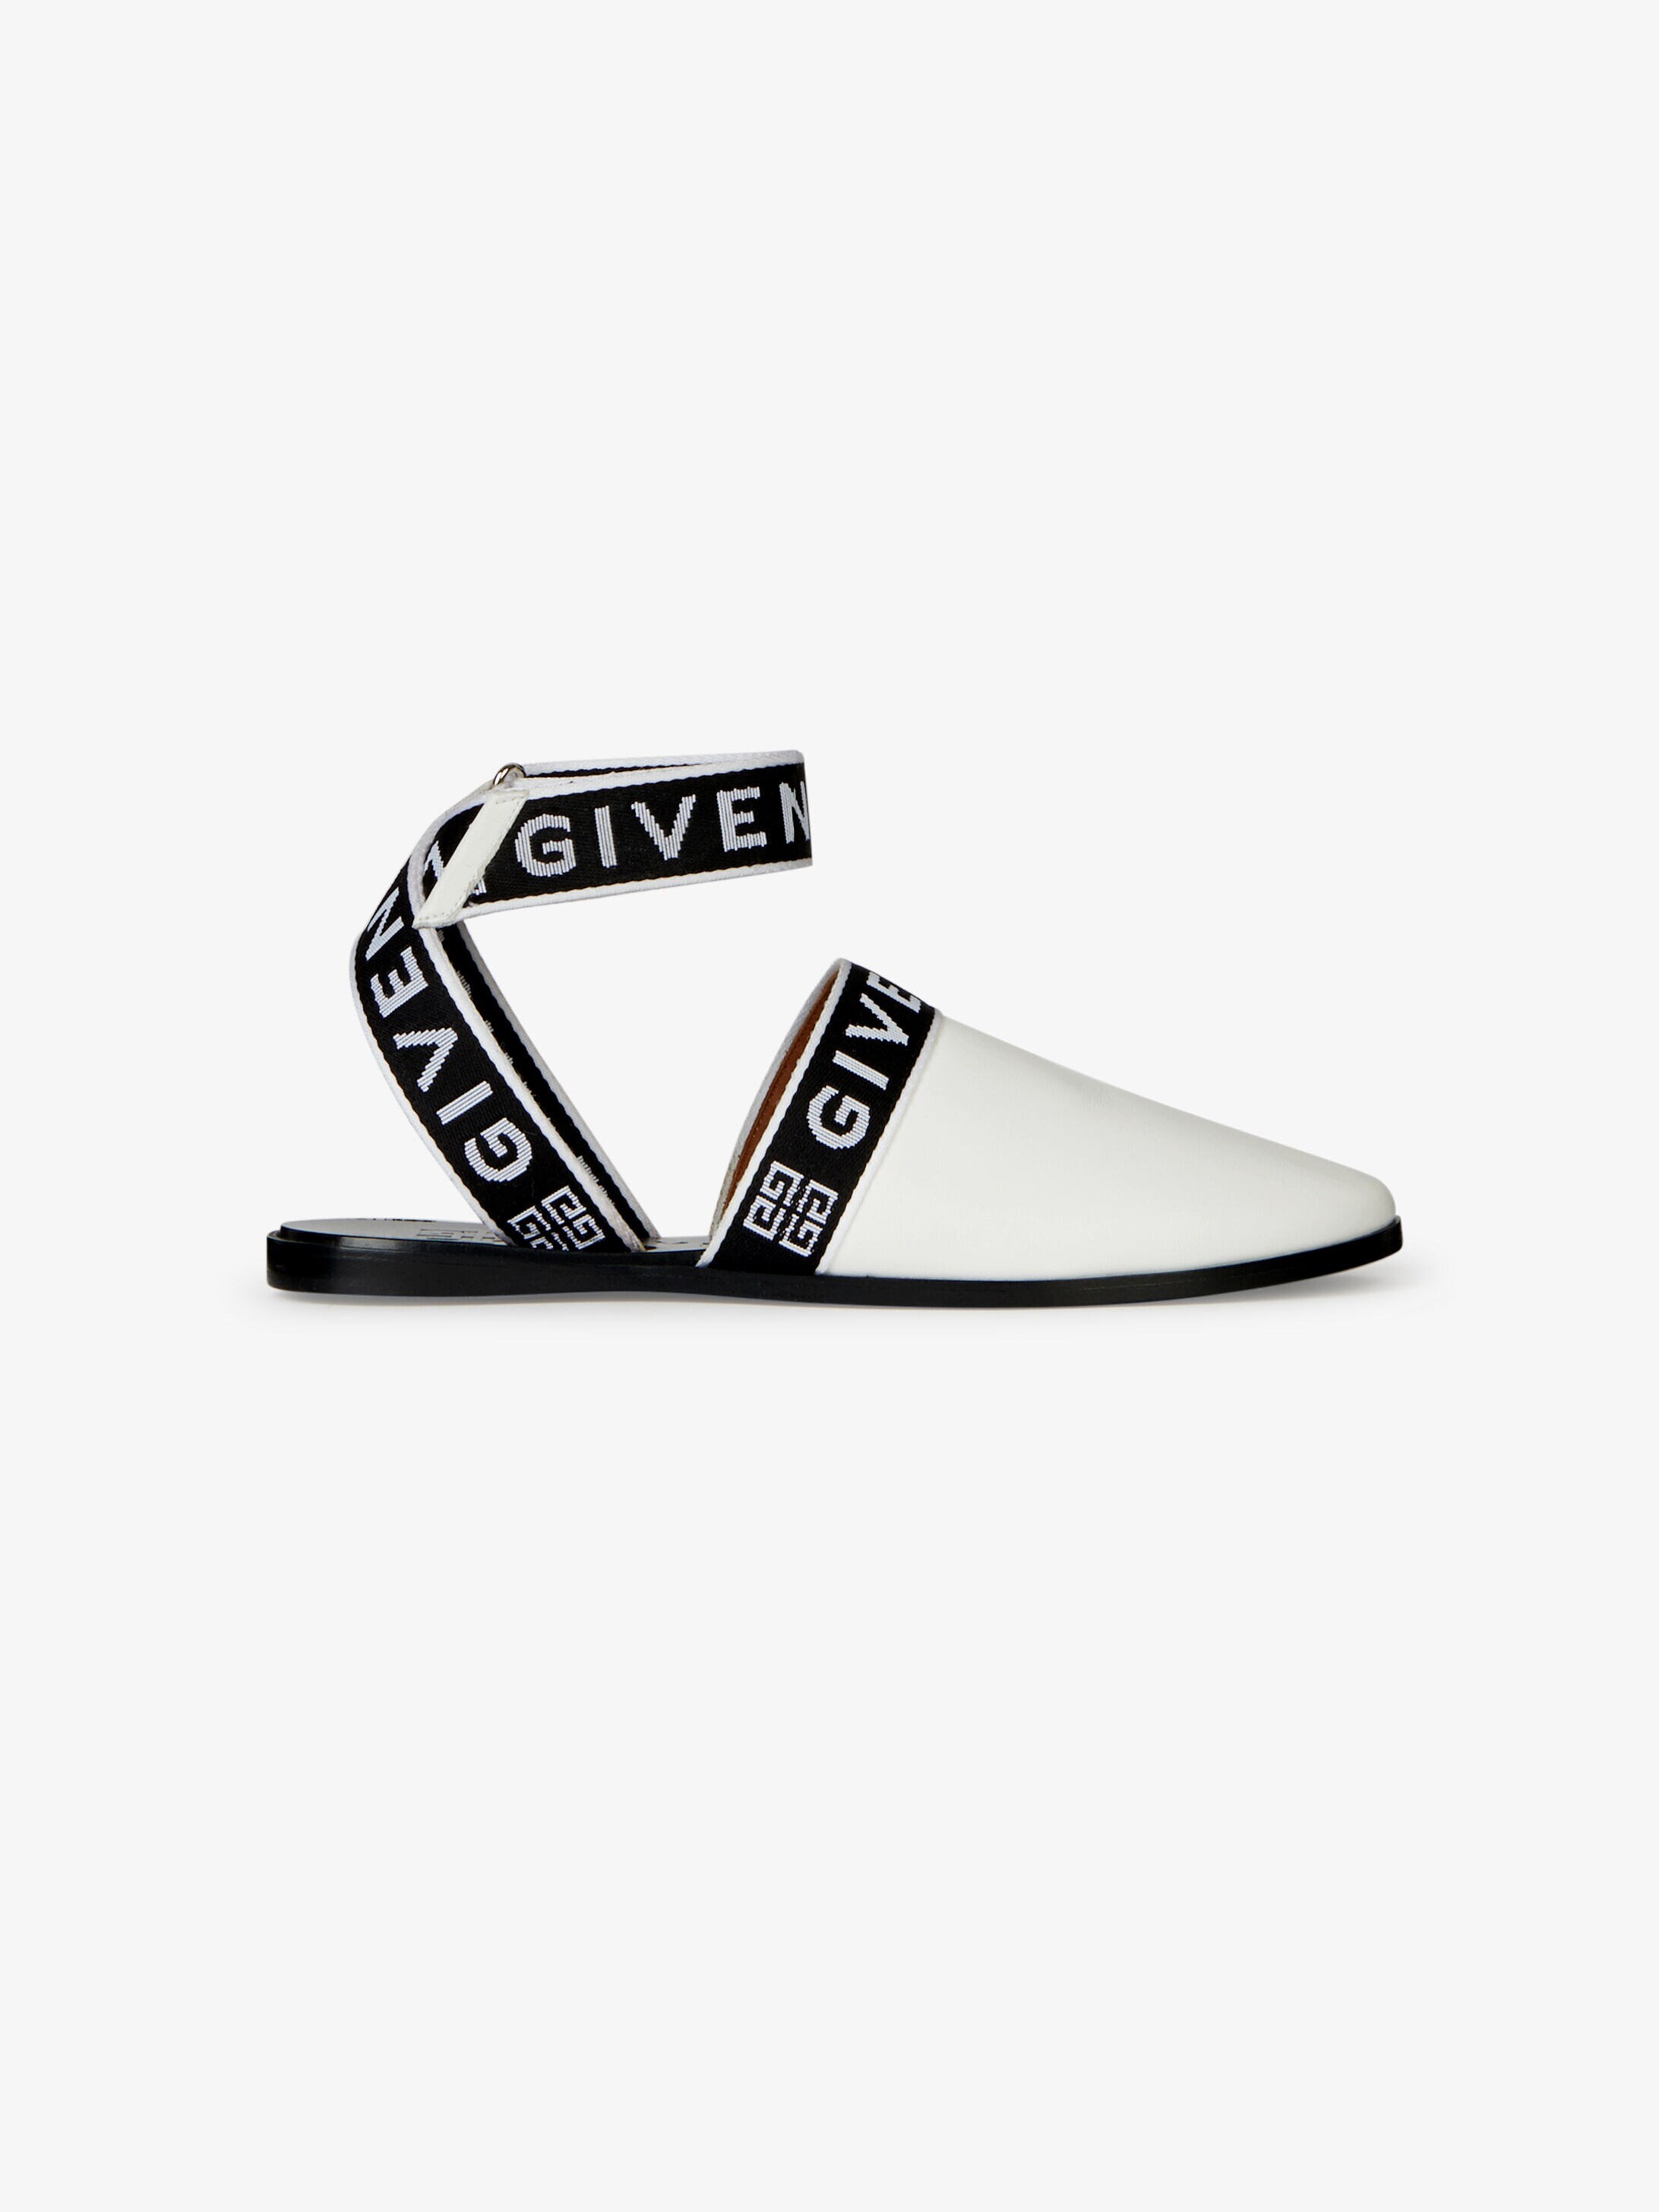 givenchy flat shoes